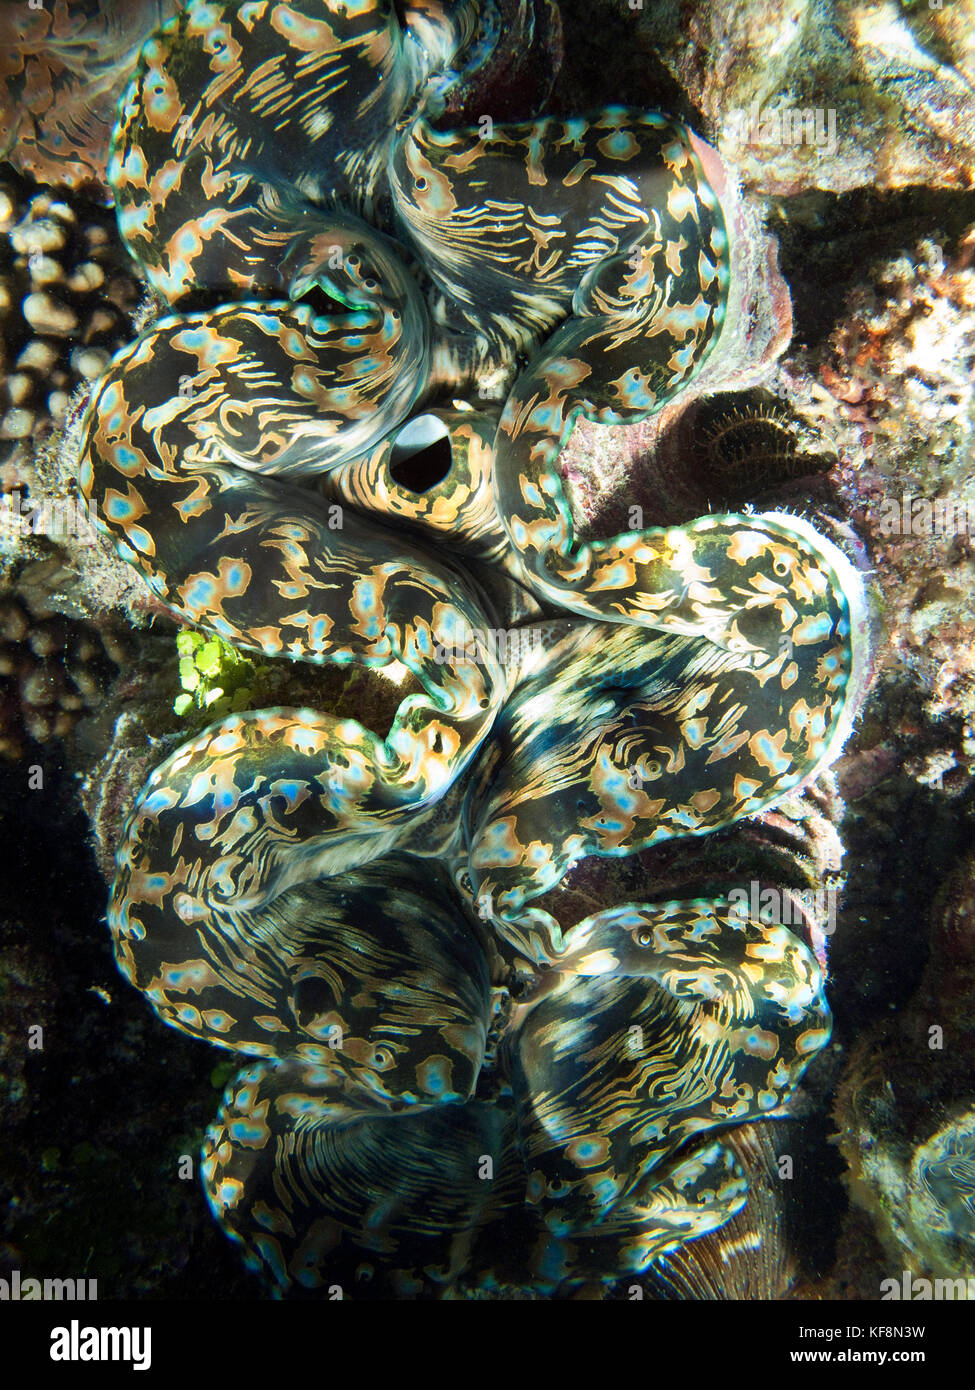 PHILIPPINES, Palawan, El Nido, Maniloc Island, a giant clam in the shallow waters at Miniloc Island Resort, Bacuit Bay in the South China Sea Stock Photo